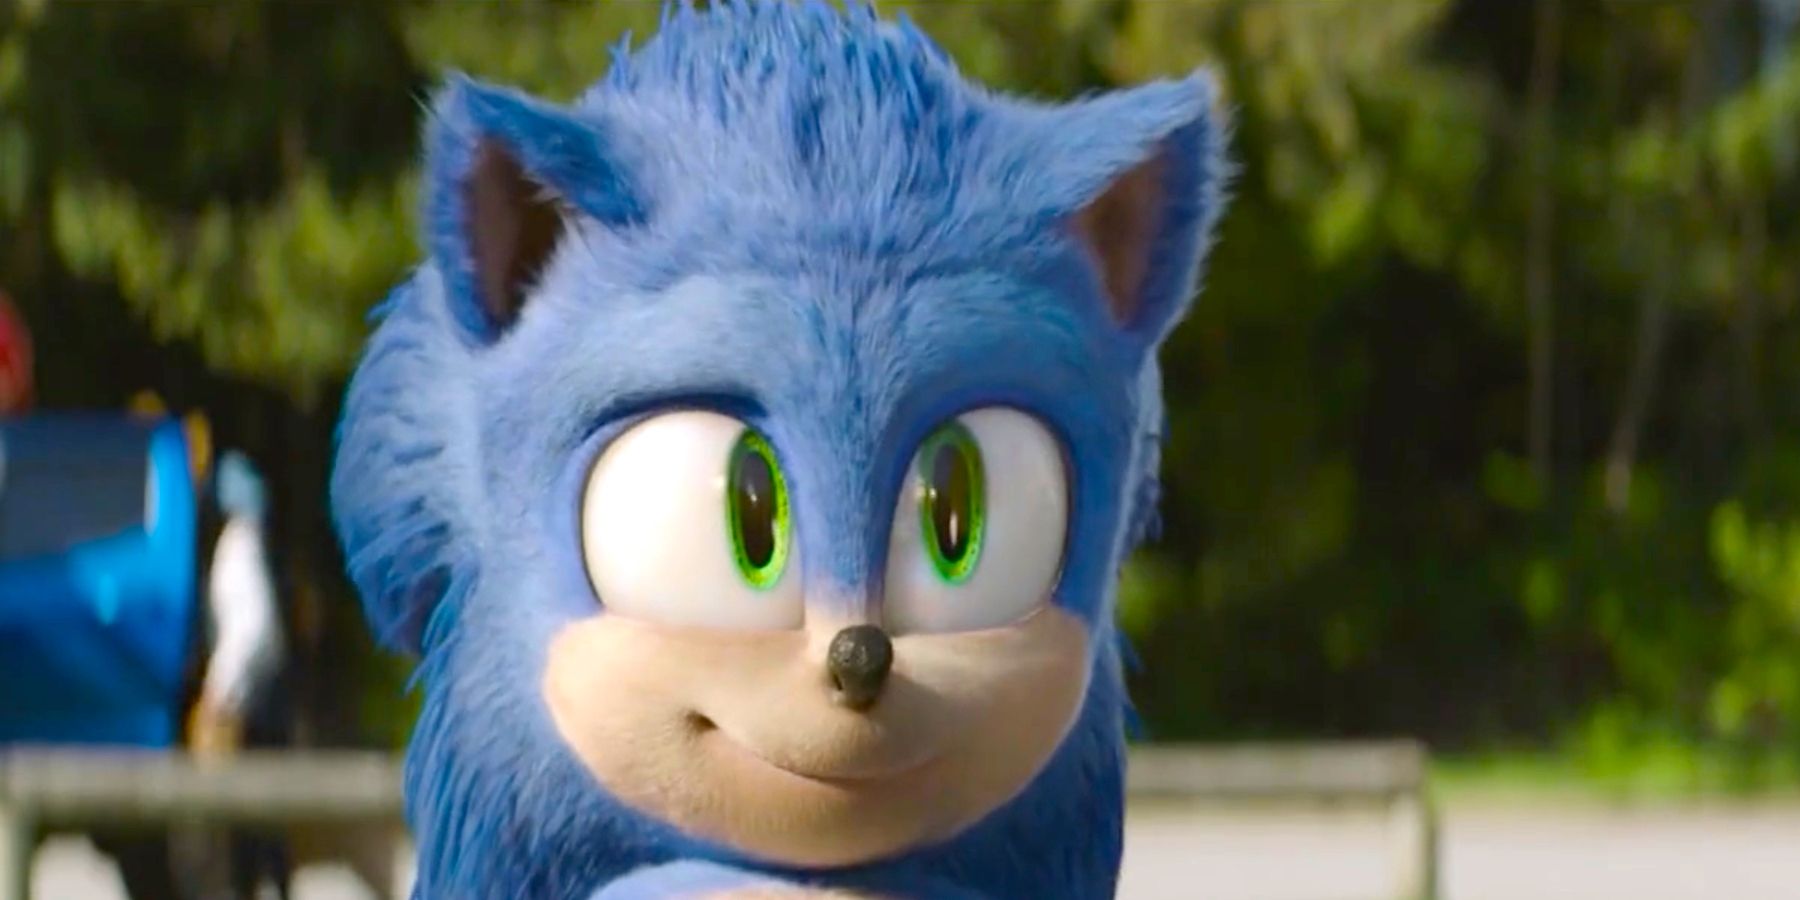 Sonic smiling in Sonic the Hedgehog 2 movie